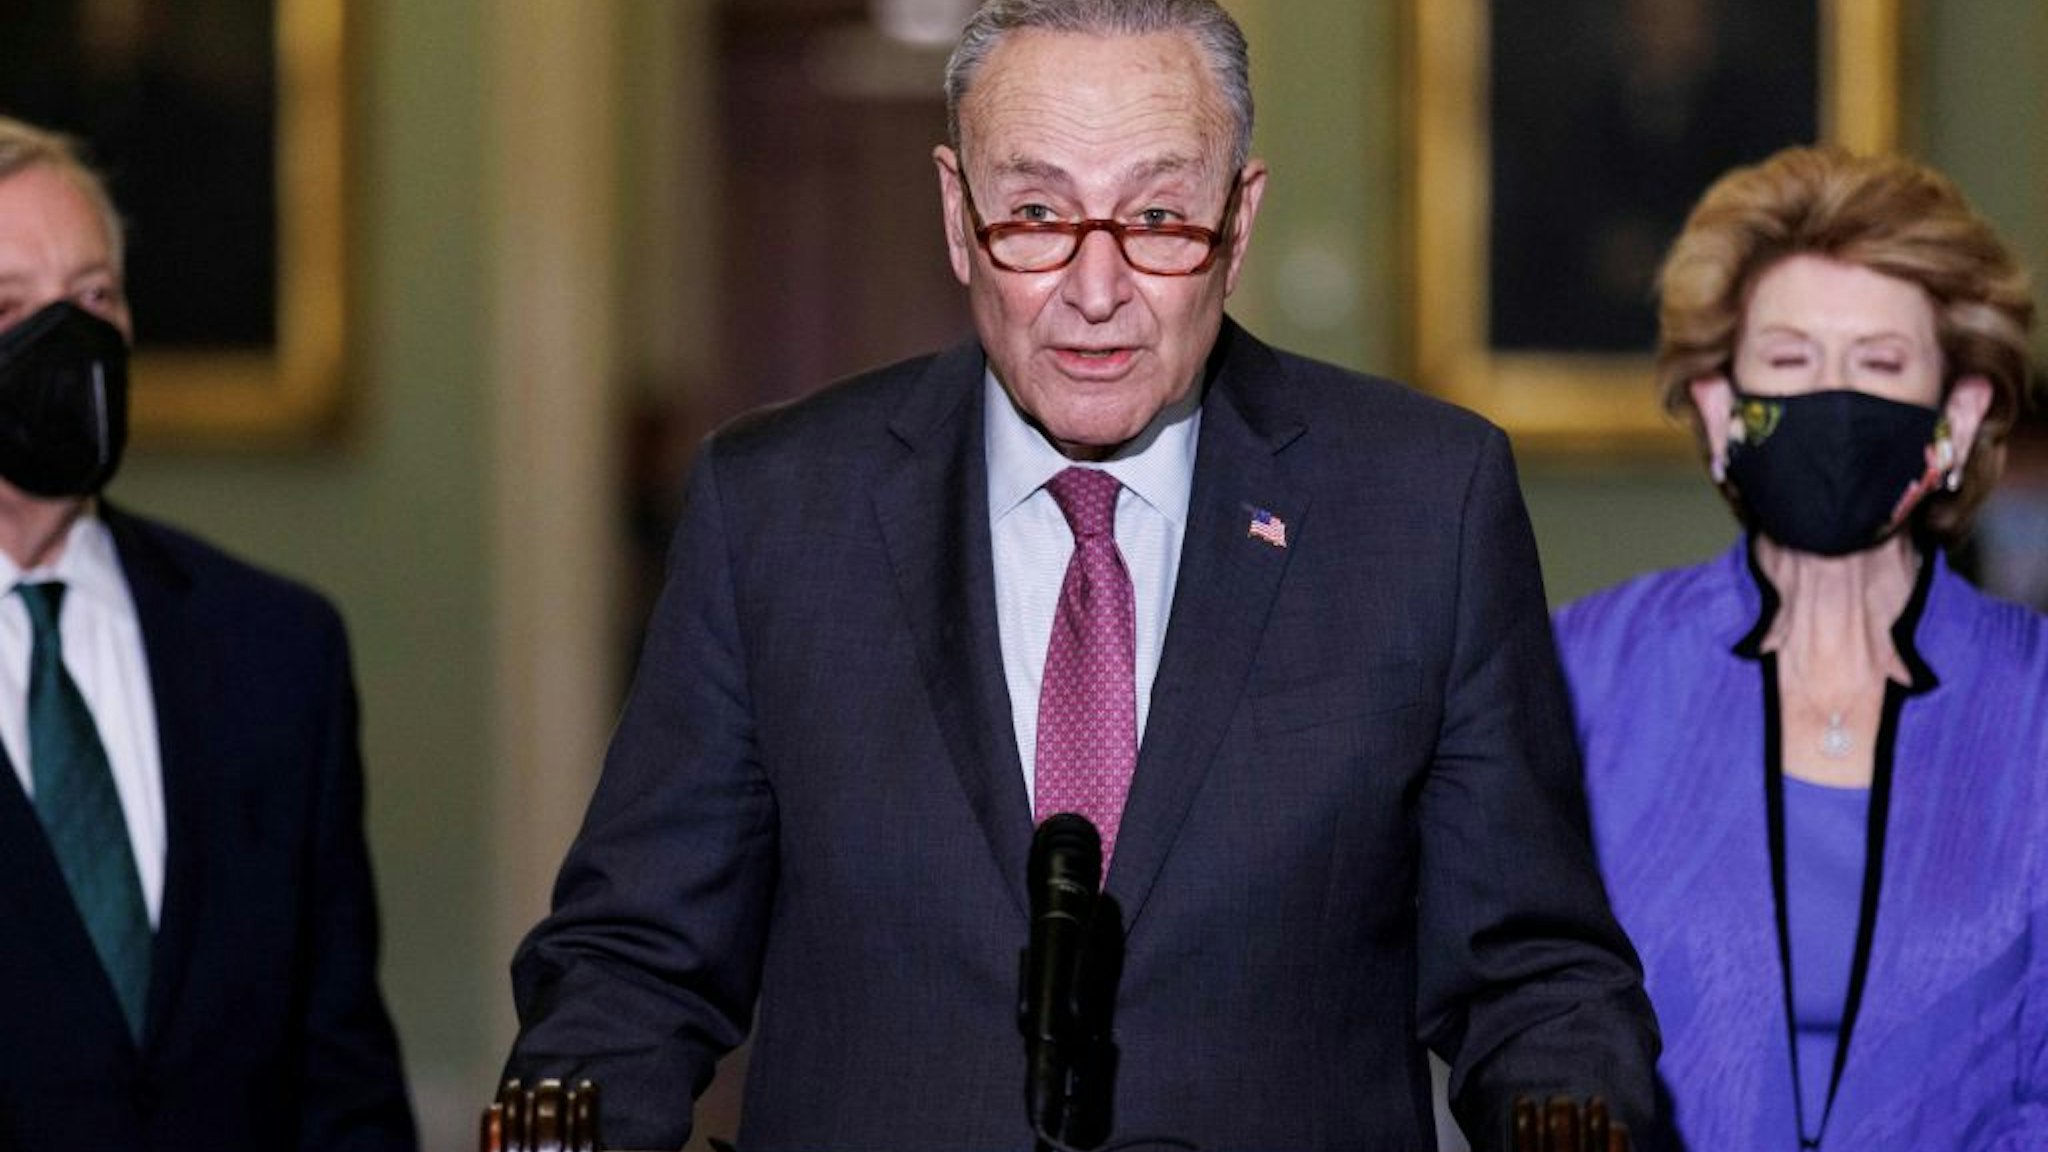 U.S. Senate Majority Leader Chuck Schumer speaks during a press conference on Capitol Hill in Washington, D.C. Dec. 14, 2021.